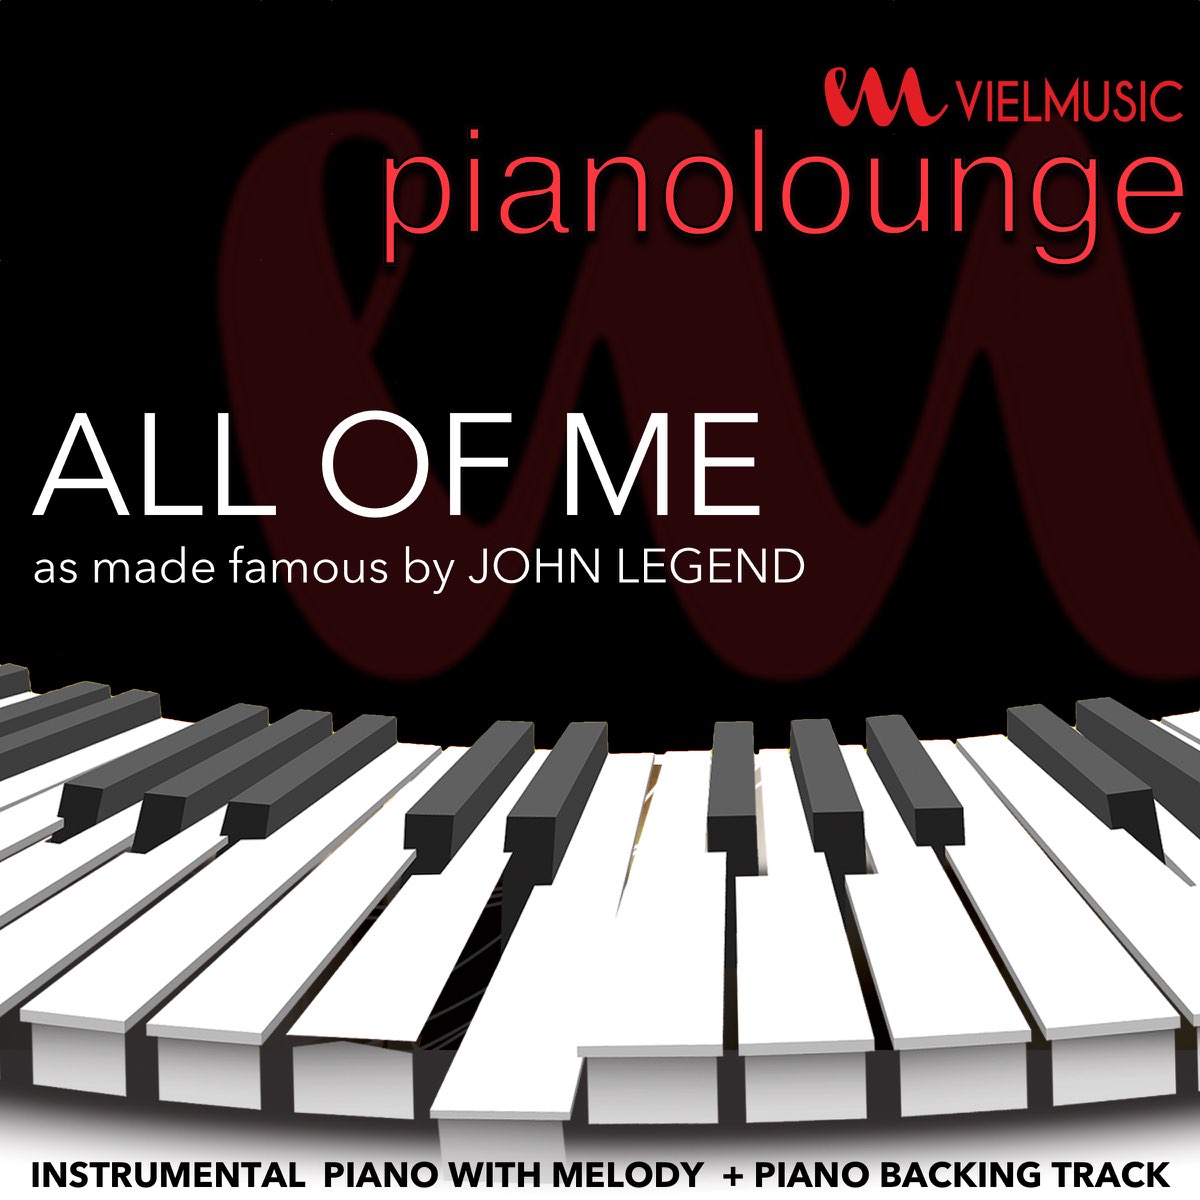 Piano Lounge - All of Me (Originally Performed by John Legend) [Piano  Karaoke Version] - Single - Album by VIEL Lounge Band - Apple Music